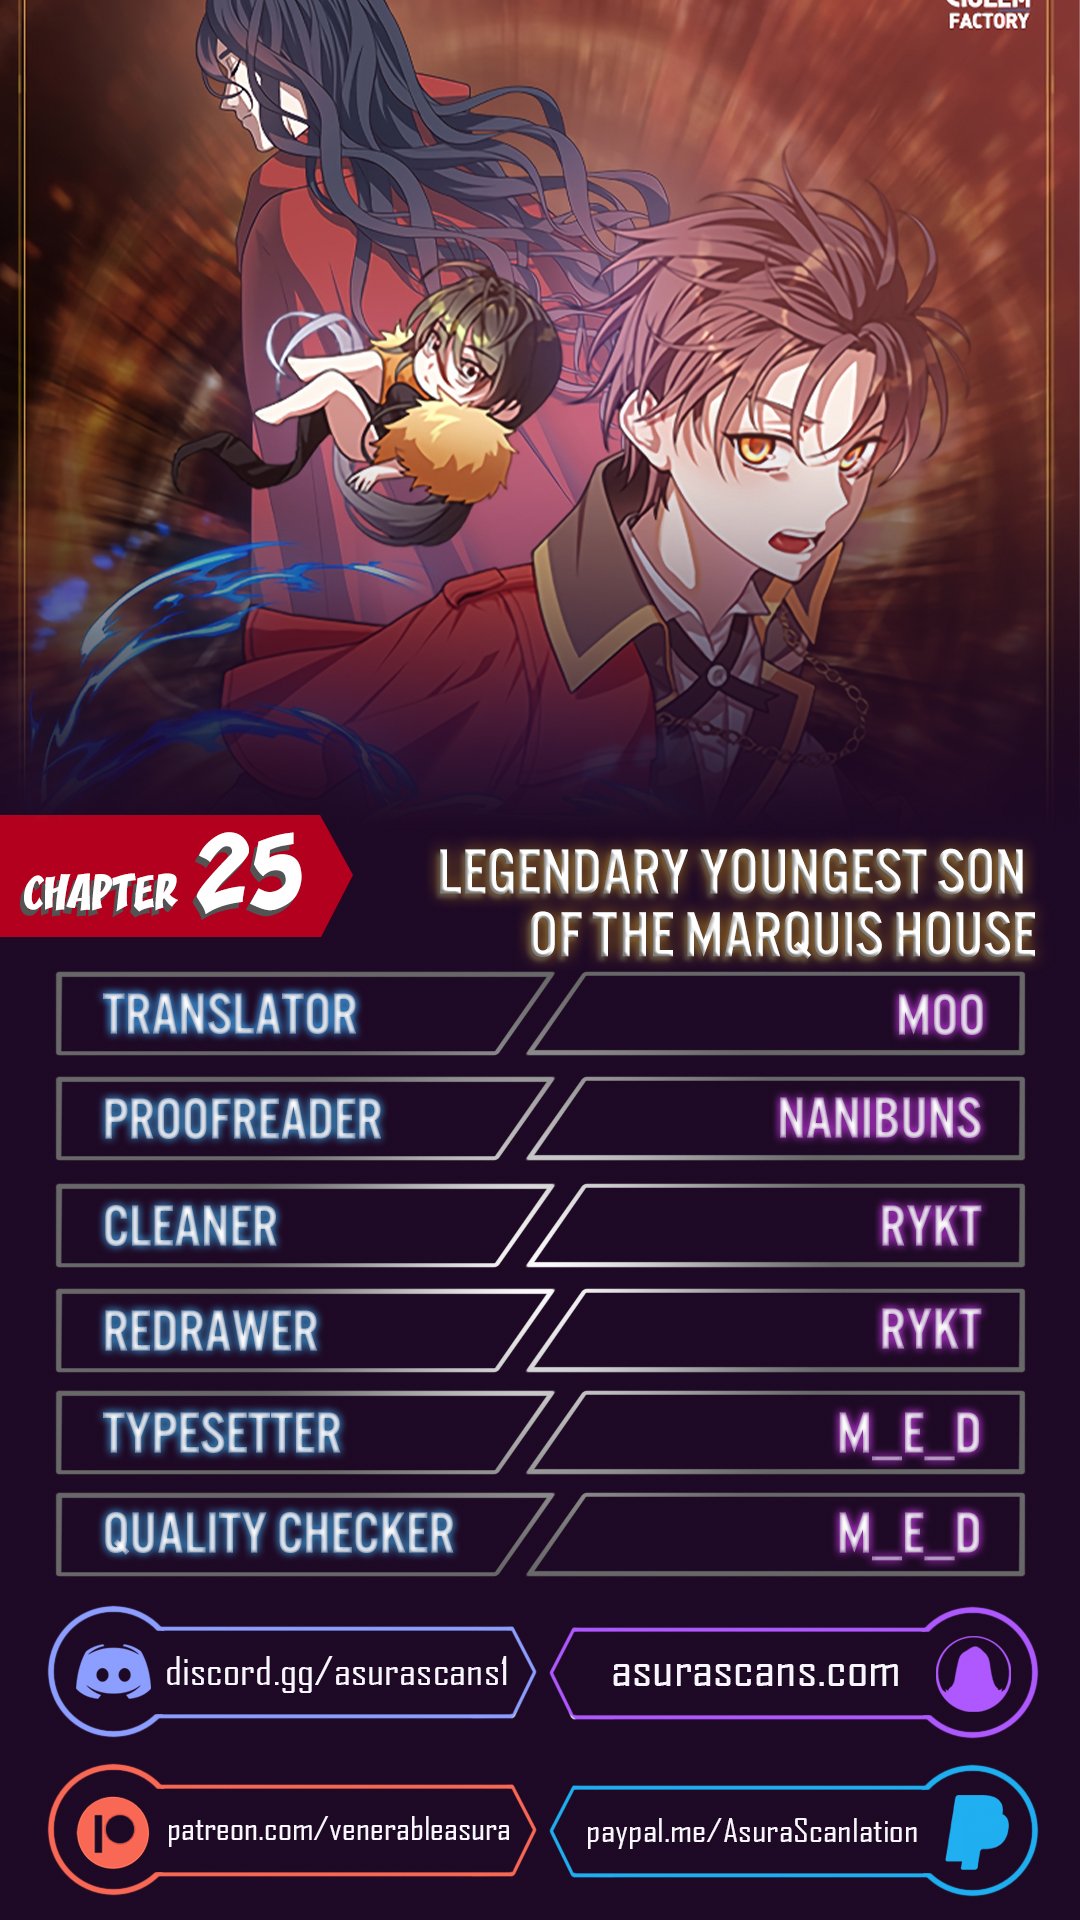 Legendary Youngest Son of the Marquis House - Chapter 18877 - Image 1